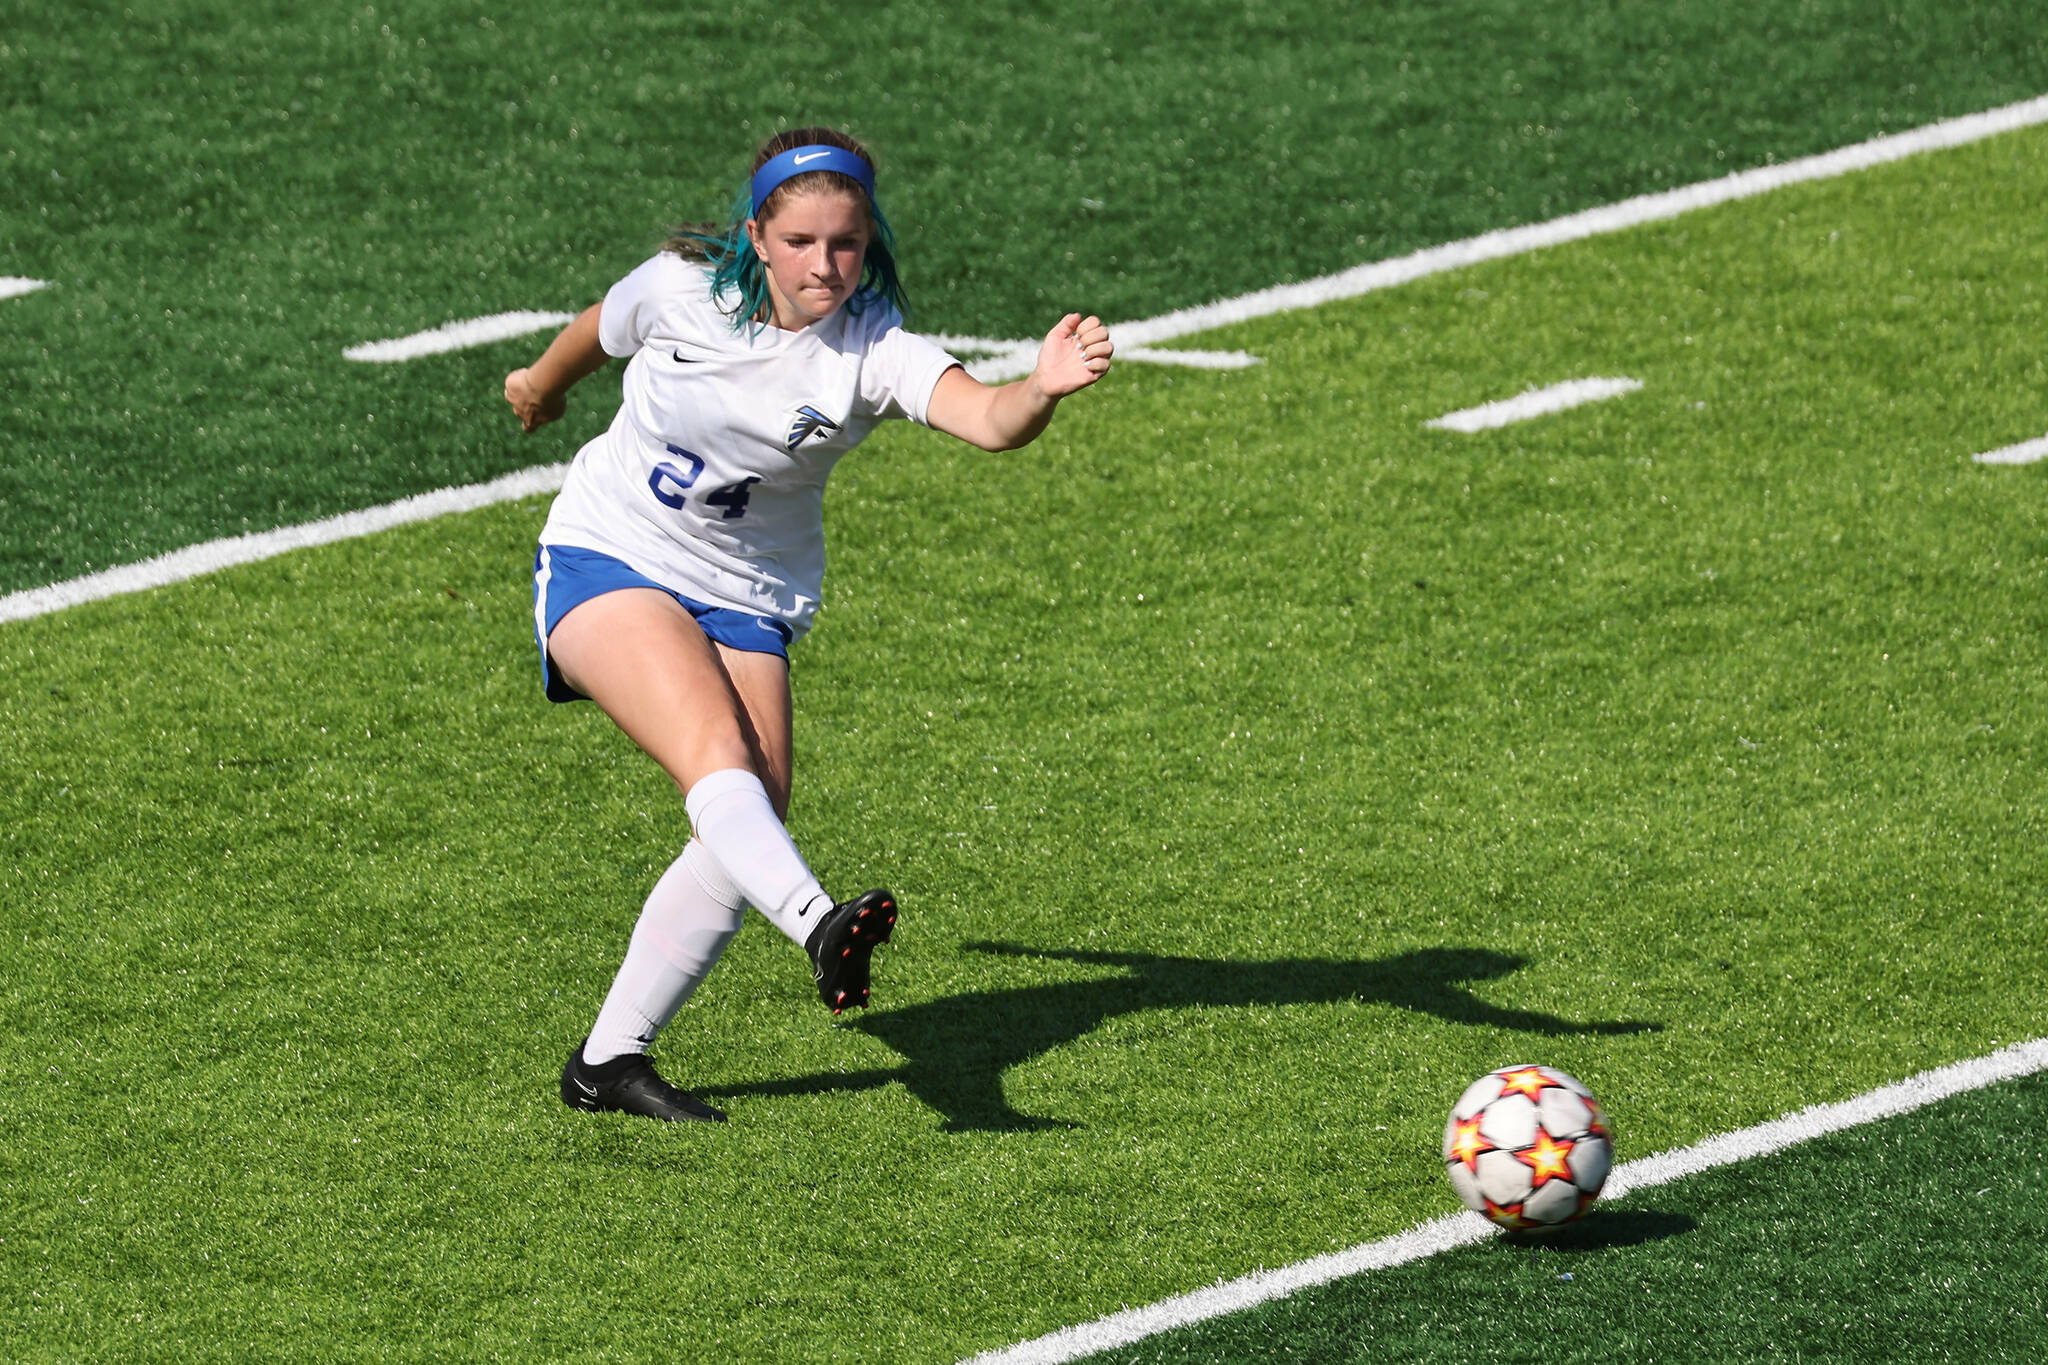 Photo by John Fisken
Sophomore Baylie Kuschnereit, a defensive midfielder for South Whidbey, aims a kick.